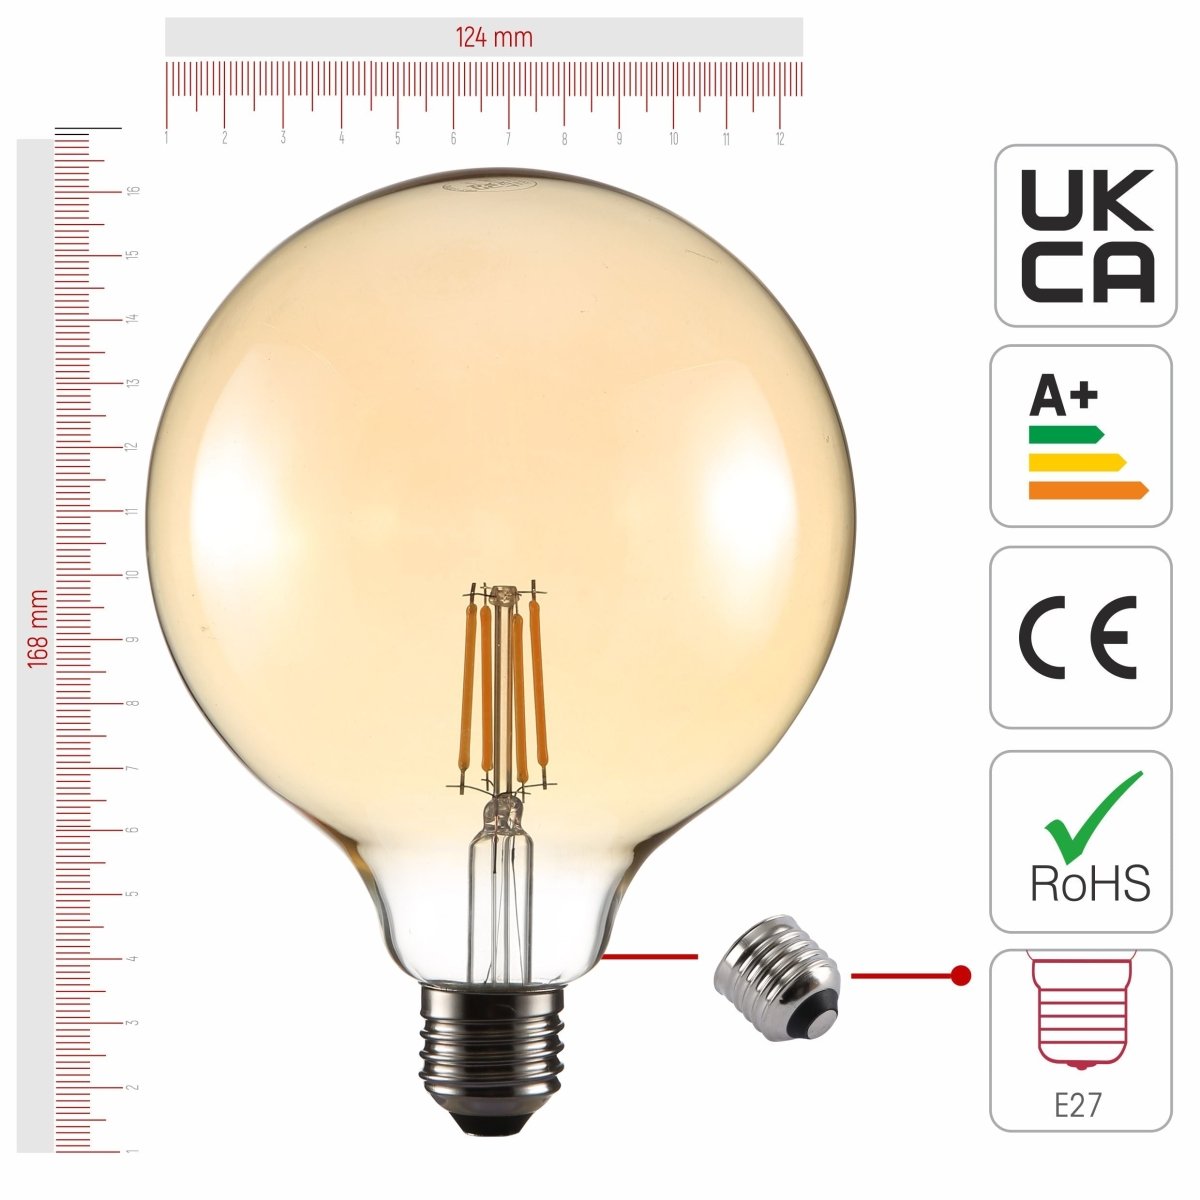 Size and certifications of LED Filament Bulb G125 Globe E27 Edison Screw 4W 410lm Warm White 2400K Amber